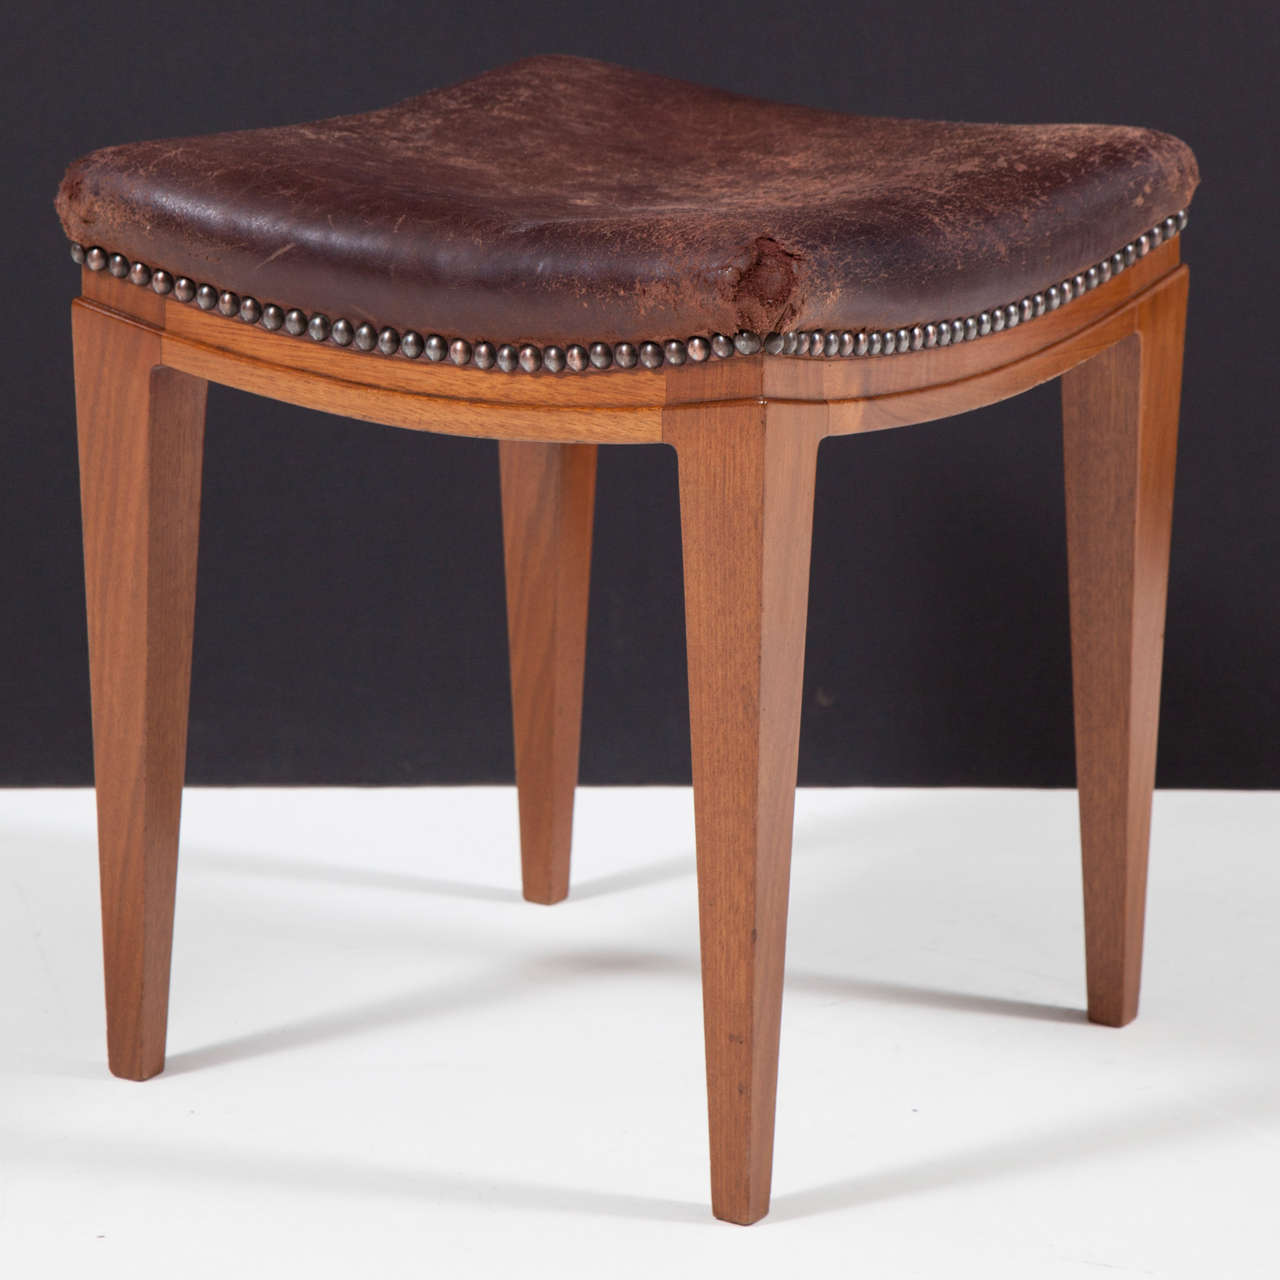 A single mahogany and leather upholstered stool, Circa 1940s, with a square leather top and french nailheads, channeled and curved frieze raised on square tapered legs.